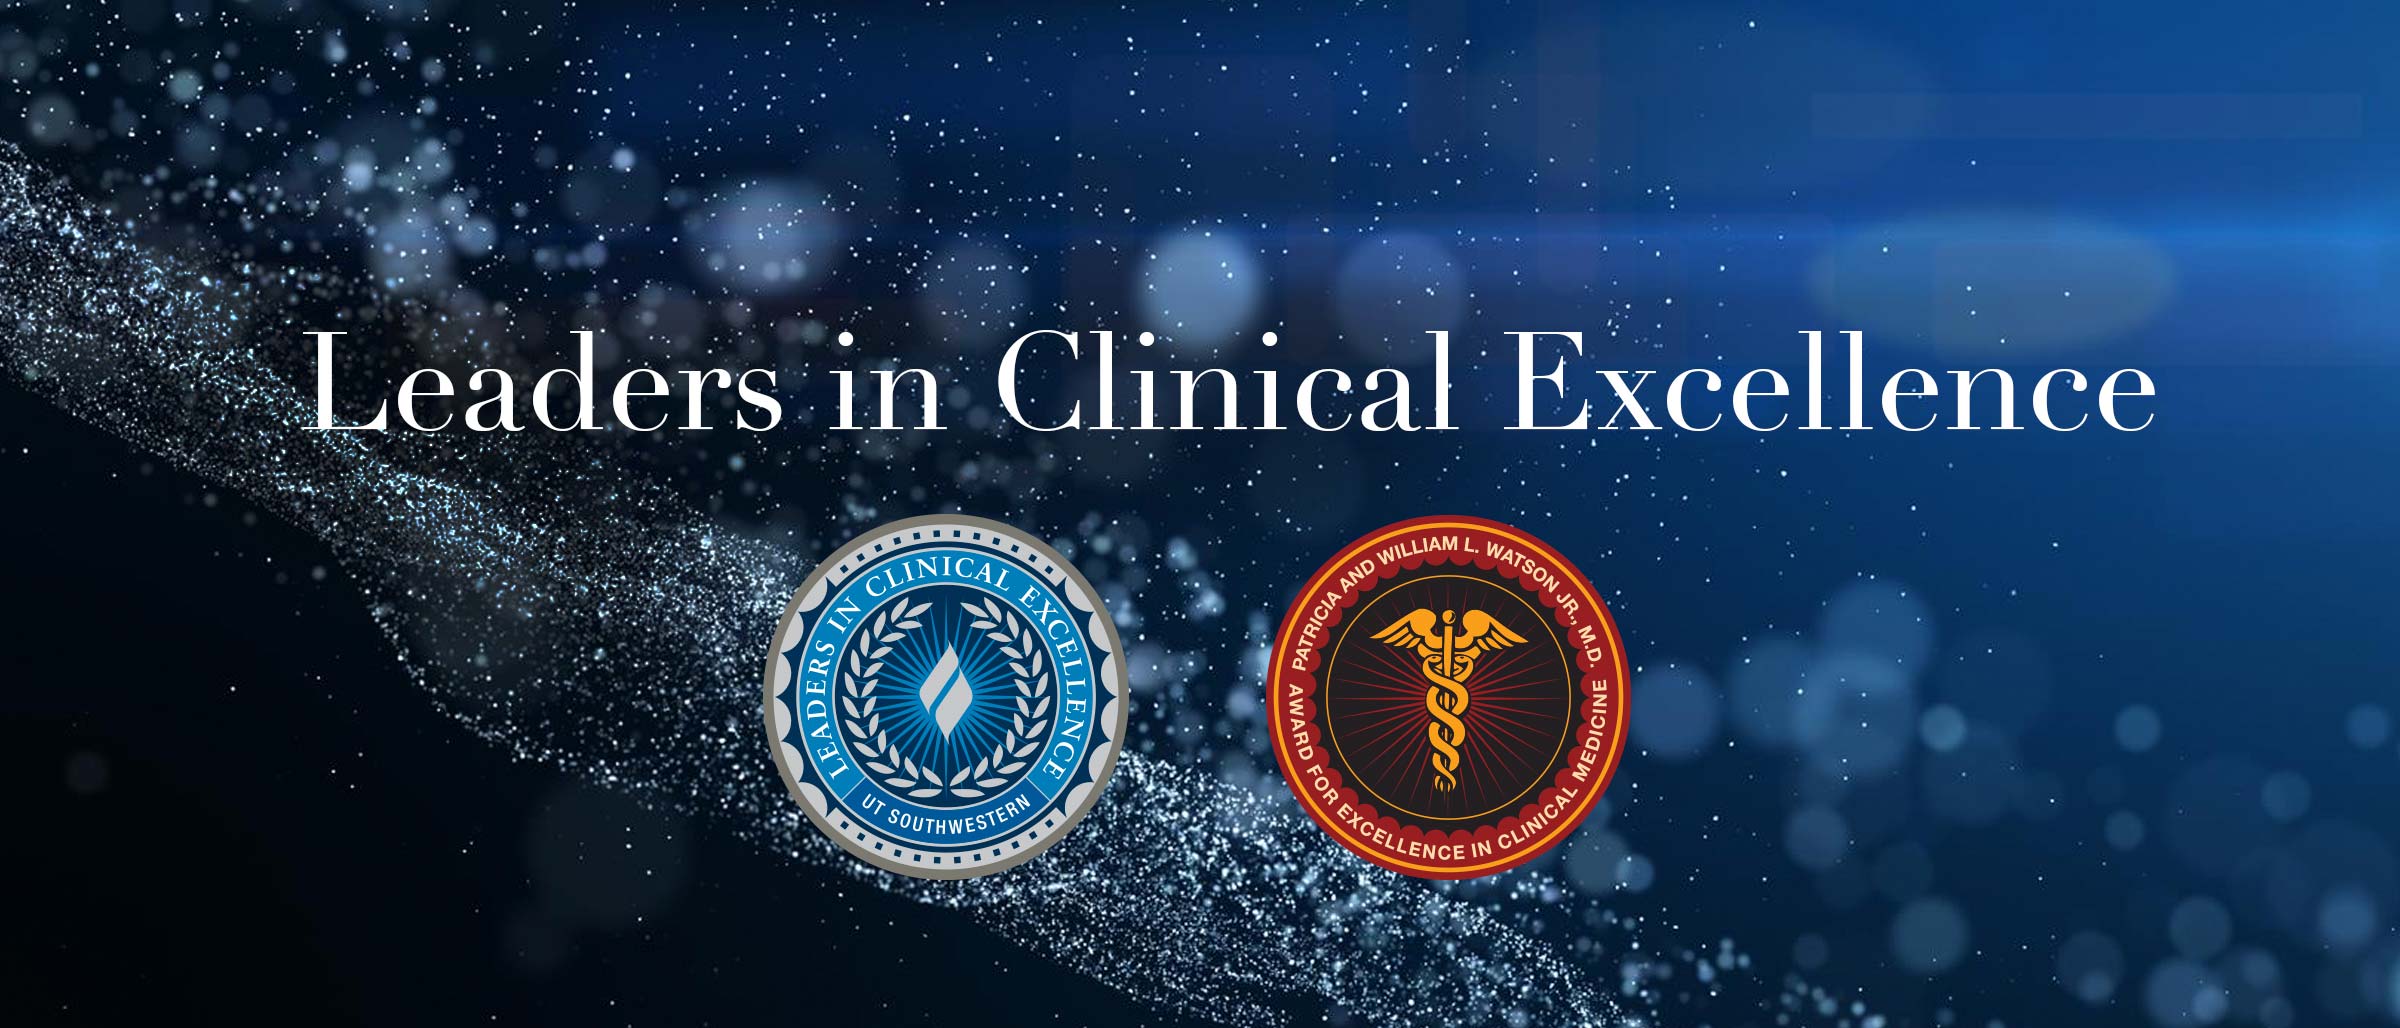 Decorative background with two award seals, and Leaders in Clinical Excellence wording